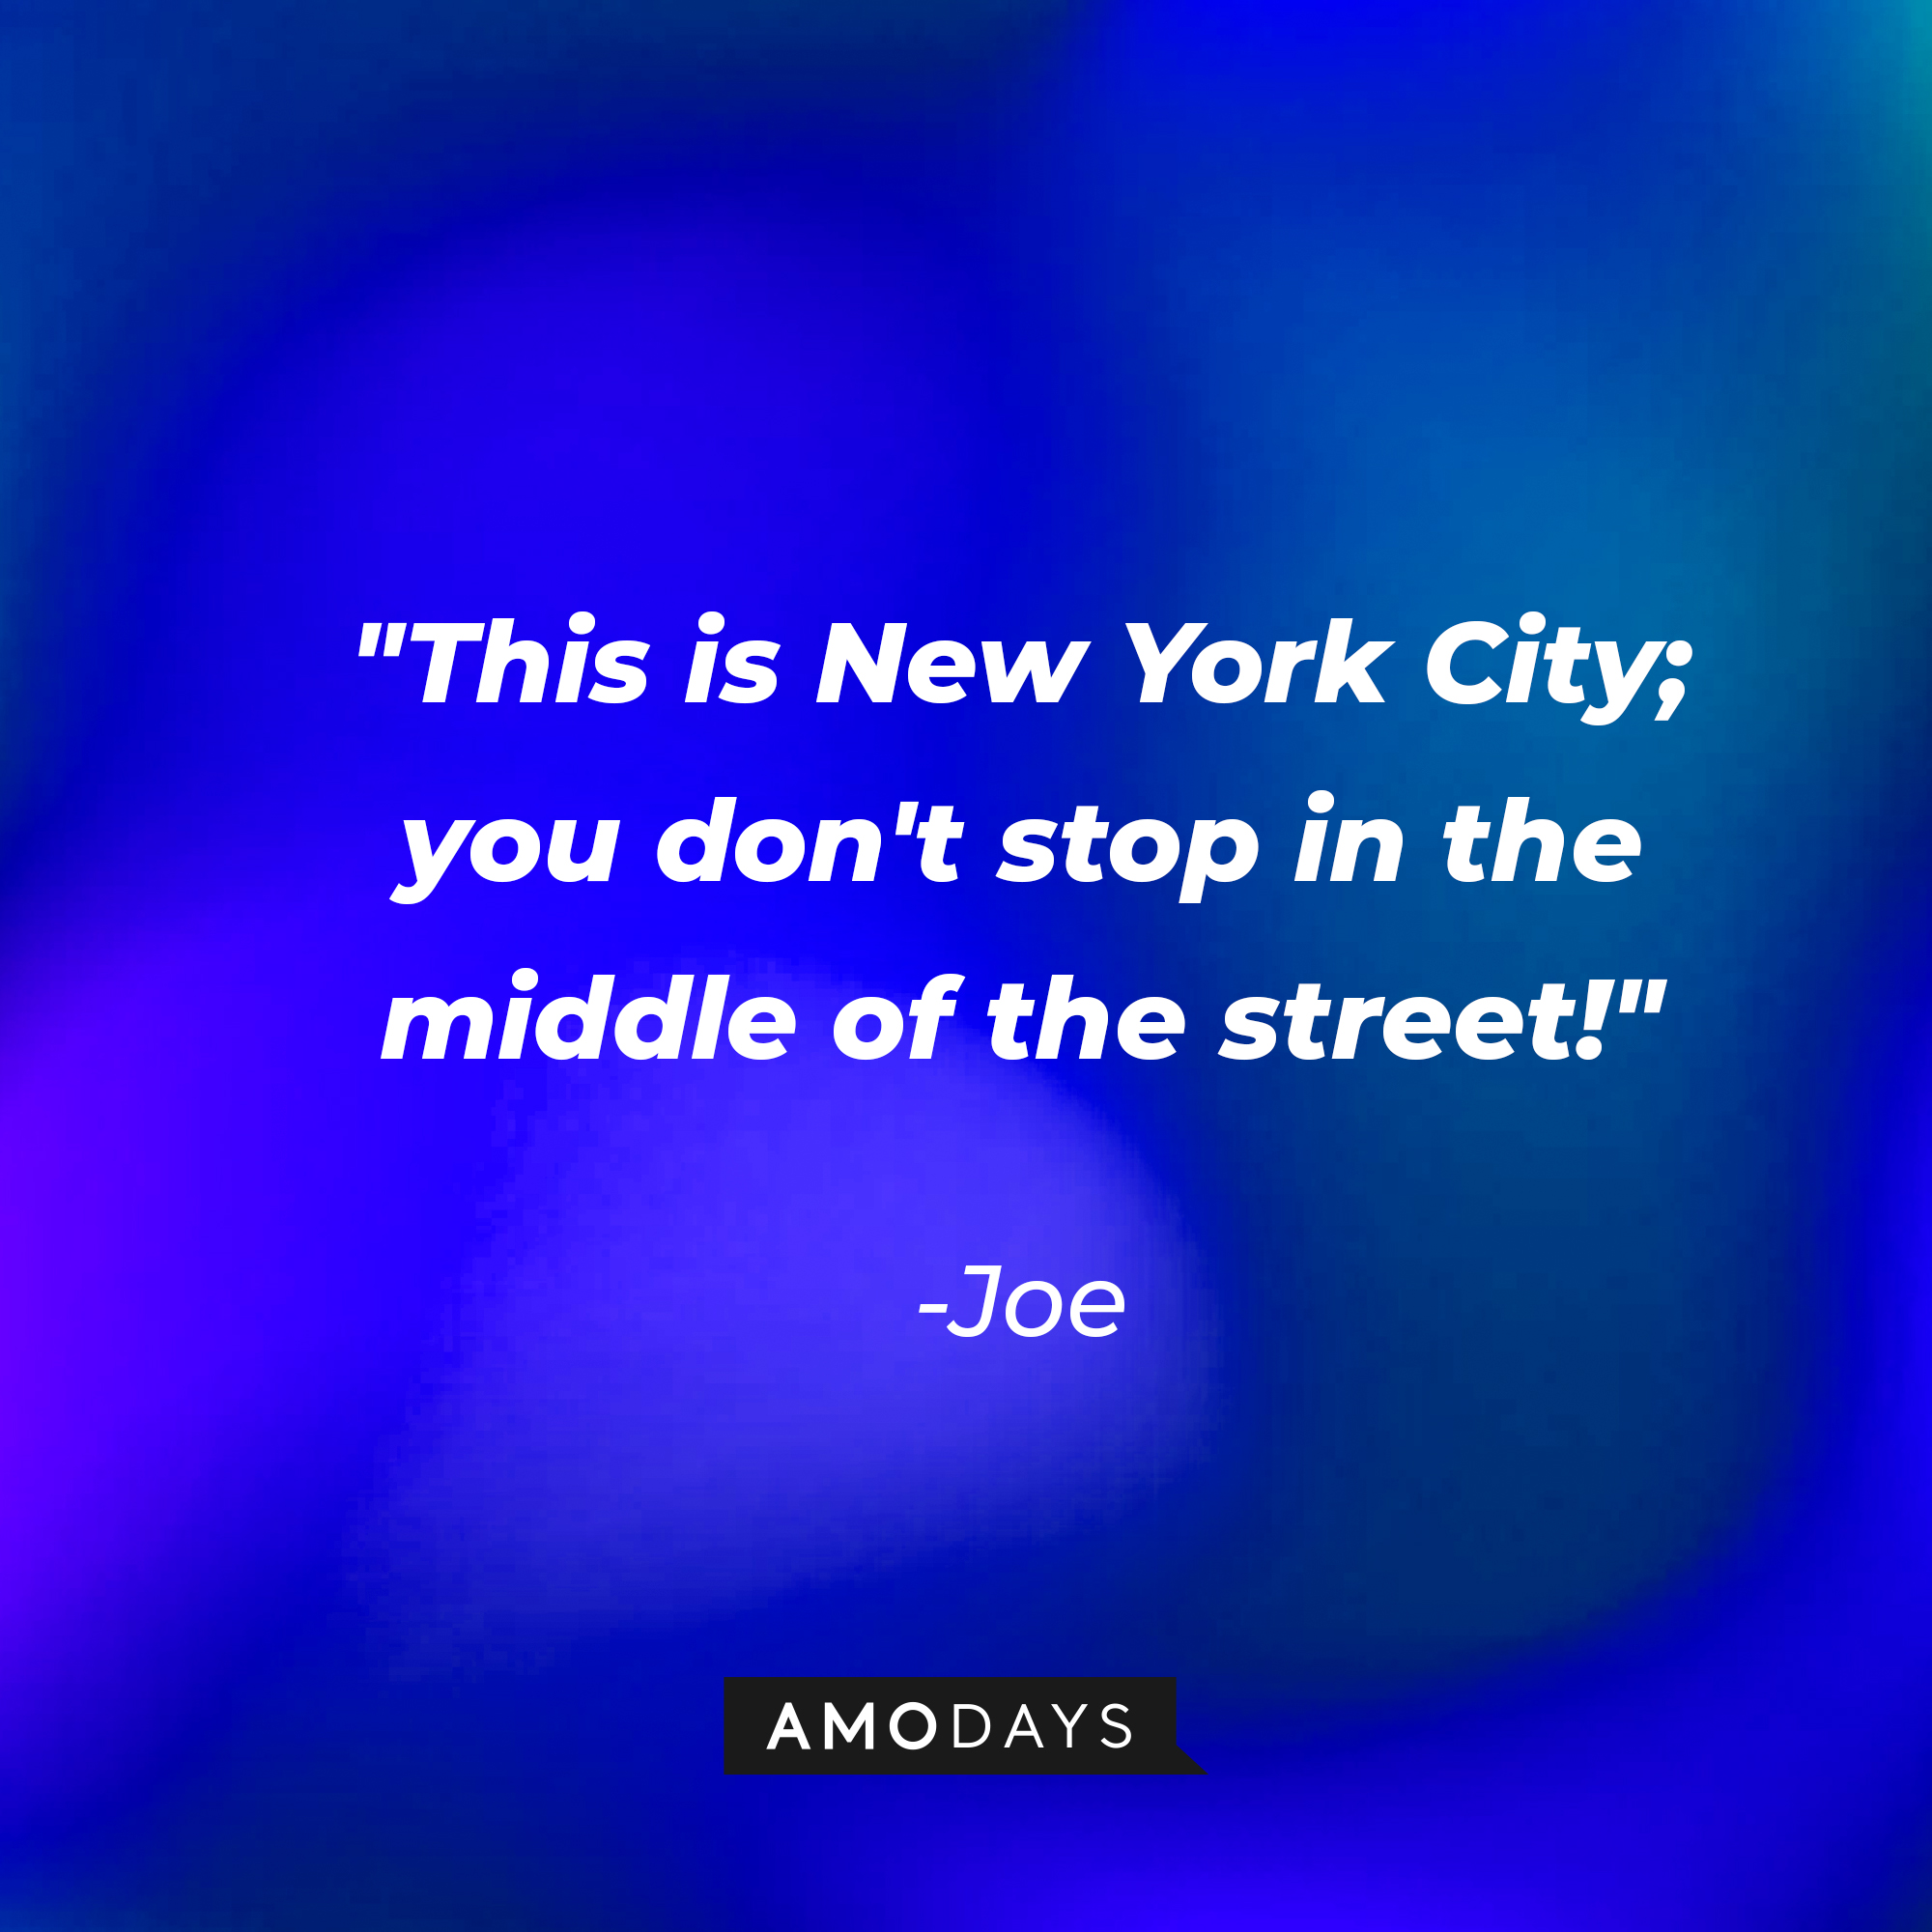 Joe's quote: "This is New York City; you don't stop in the middle of the street!" | Source: youtube.com/pixar